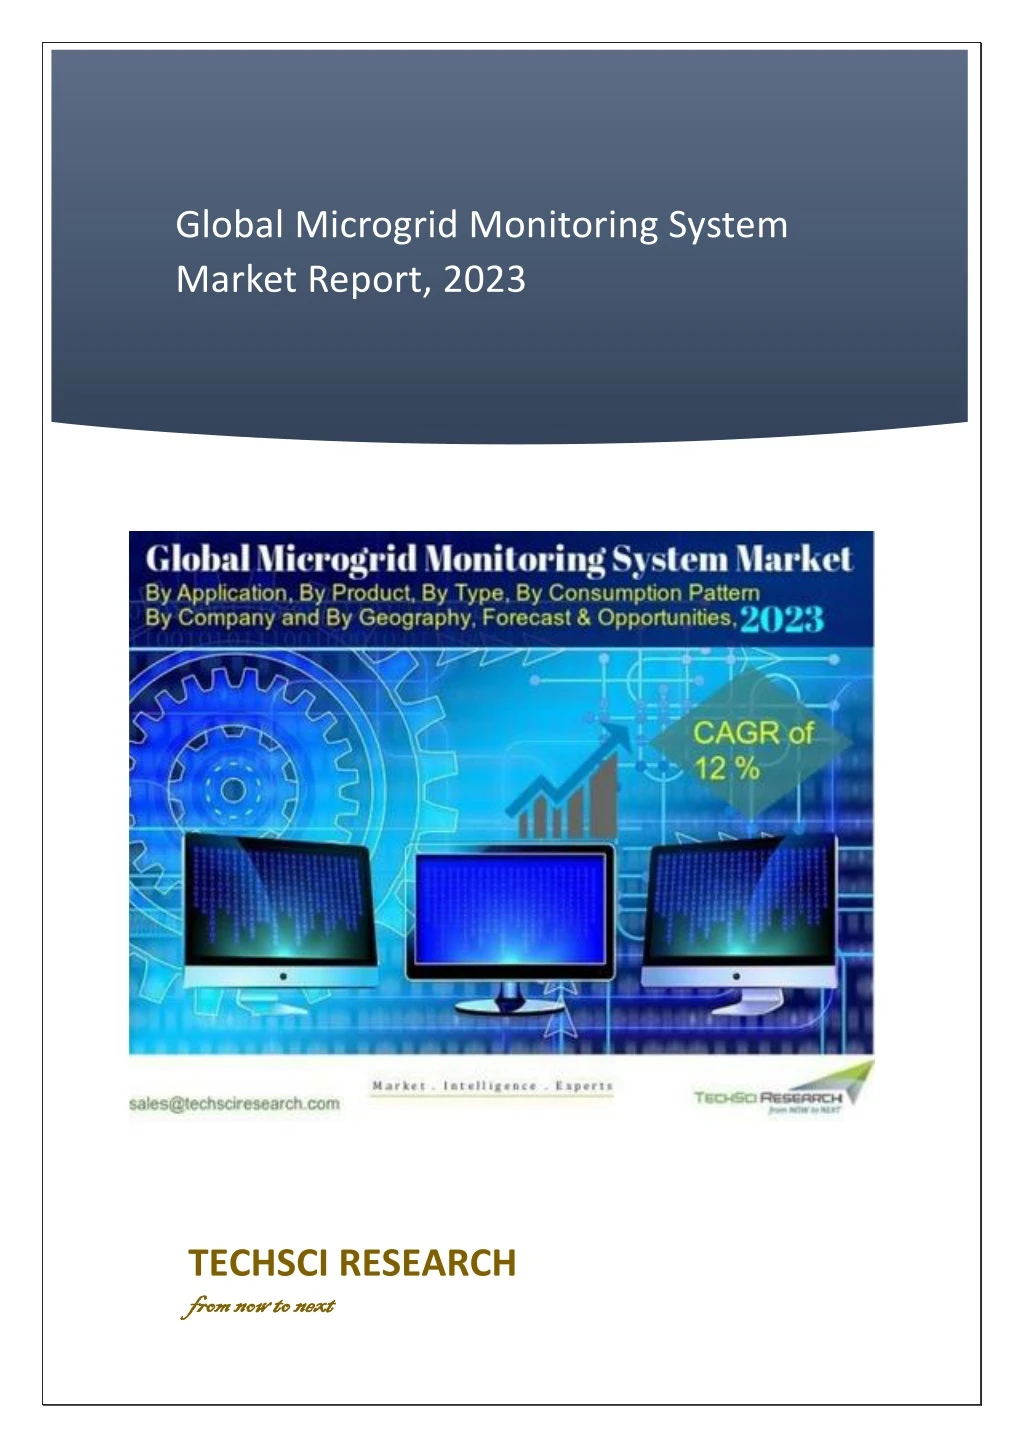 global microgrid monitoring system market report